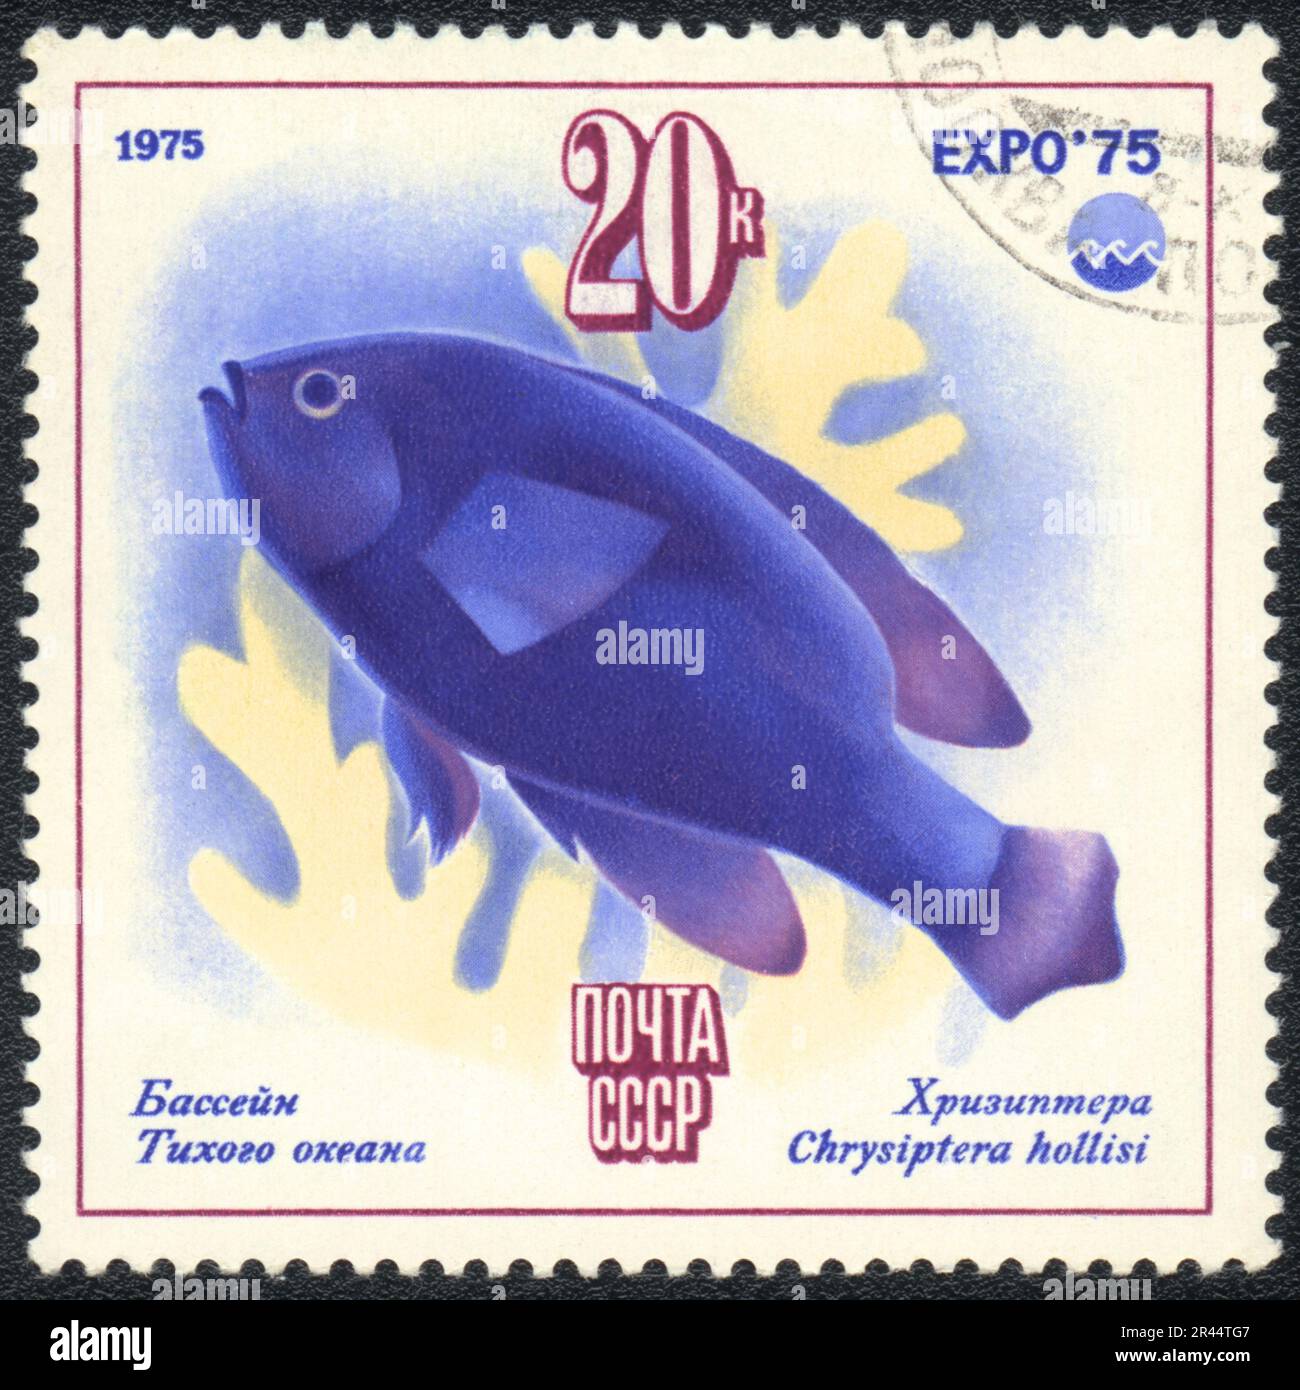 A stamp printed in USSR  shows Pacific Ocean fish Chrysiptera hollisi, from series 'EXPO 75', circa 1975 Stock Photo